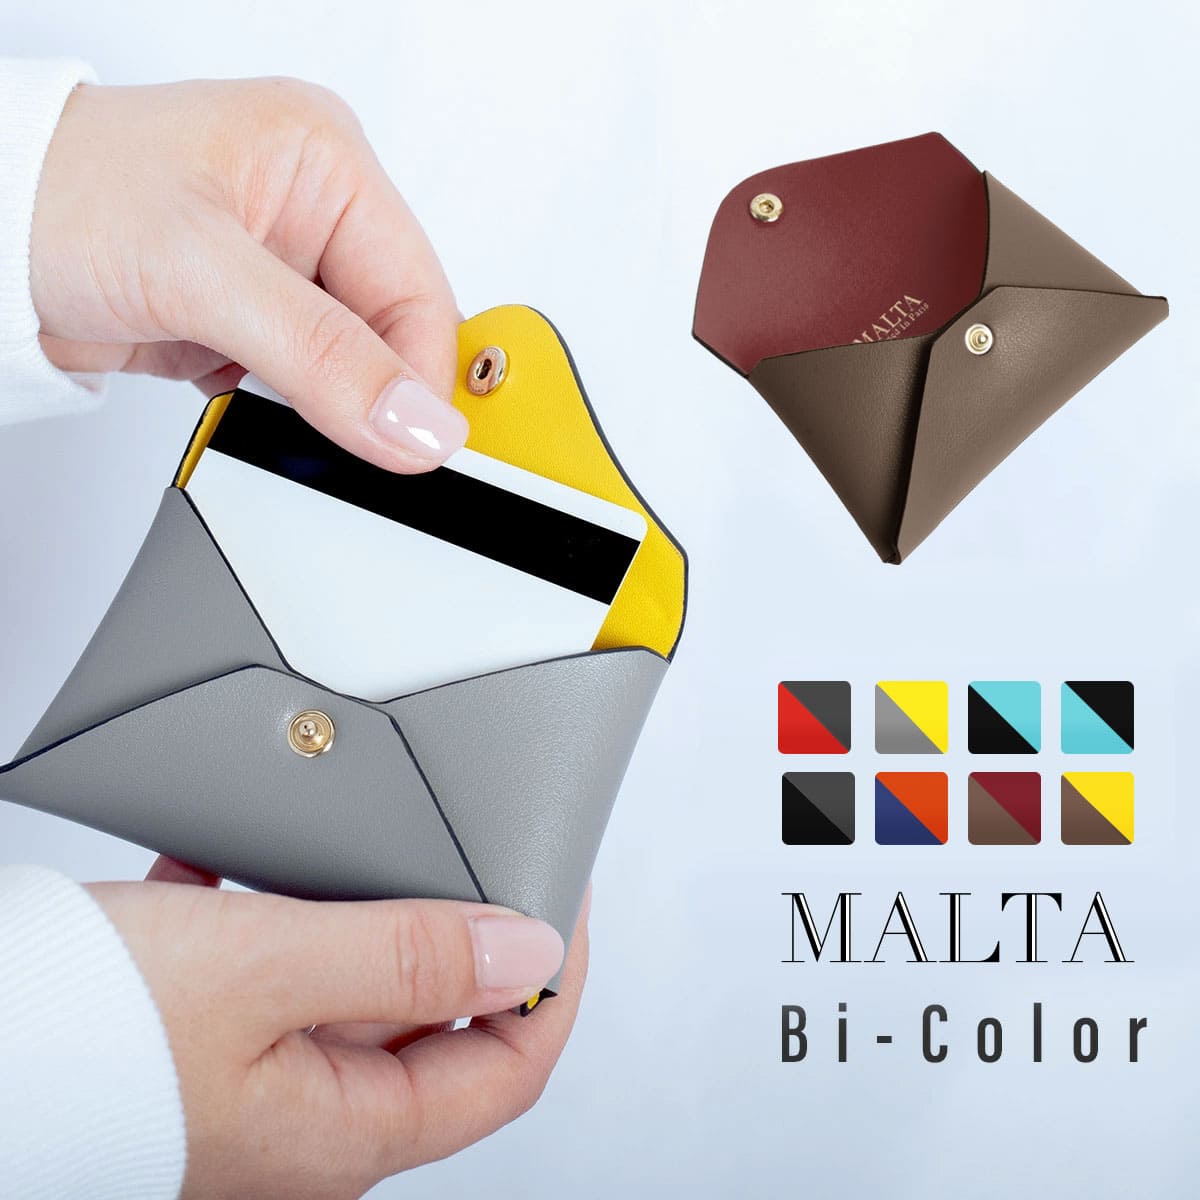  card-case lady's high capacity cow leather brand bai color leather 15 pcs storage Point card credit card business card card-case compact slim MALTA